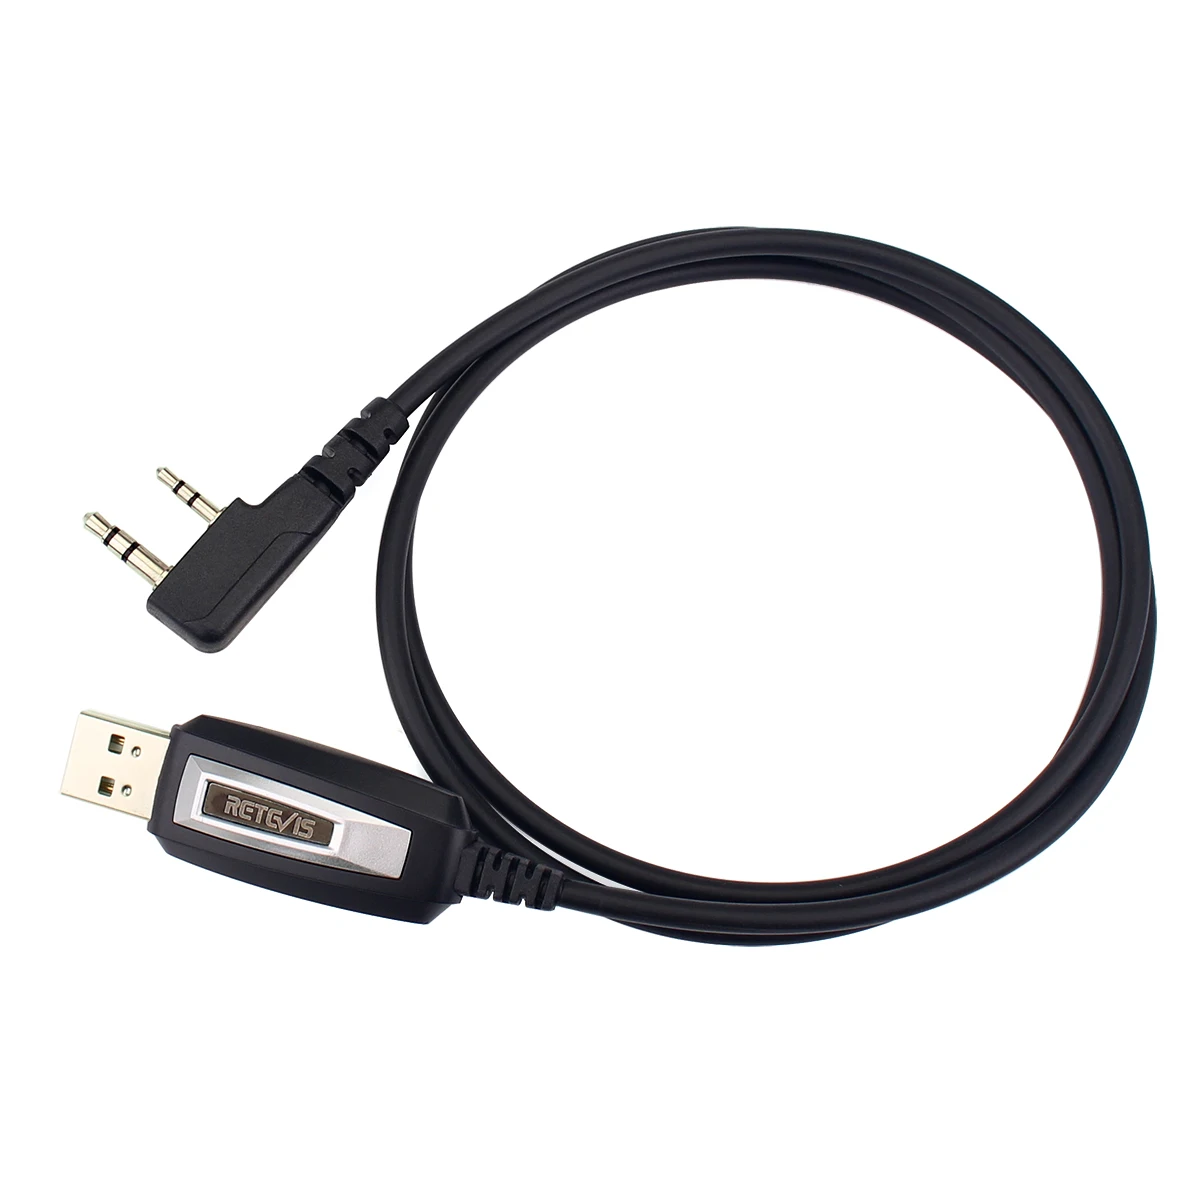 Two-pin USB Programming Cable Walkie Talkie For Kenwood Baofeng UV-5R UV-82 RETEVIS H777 RT22 RT-5R RT81 For Win XP/7/8 System